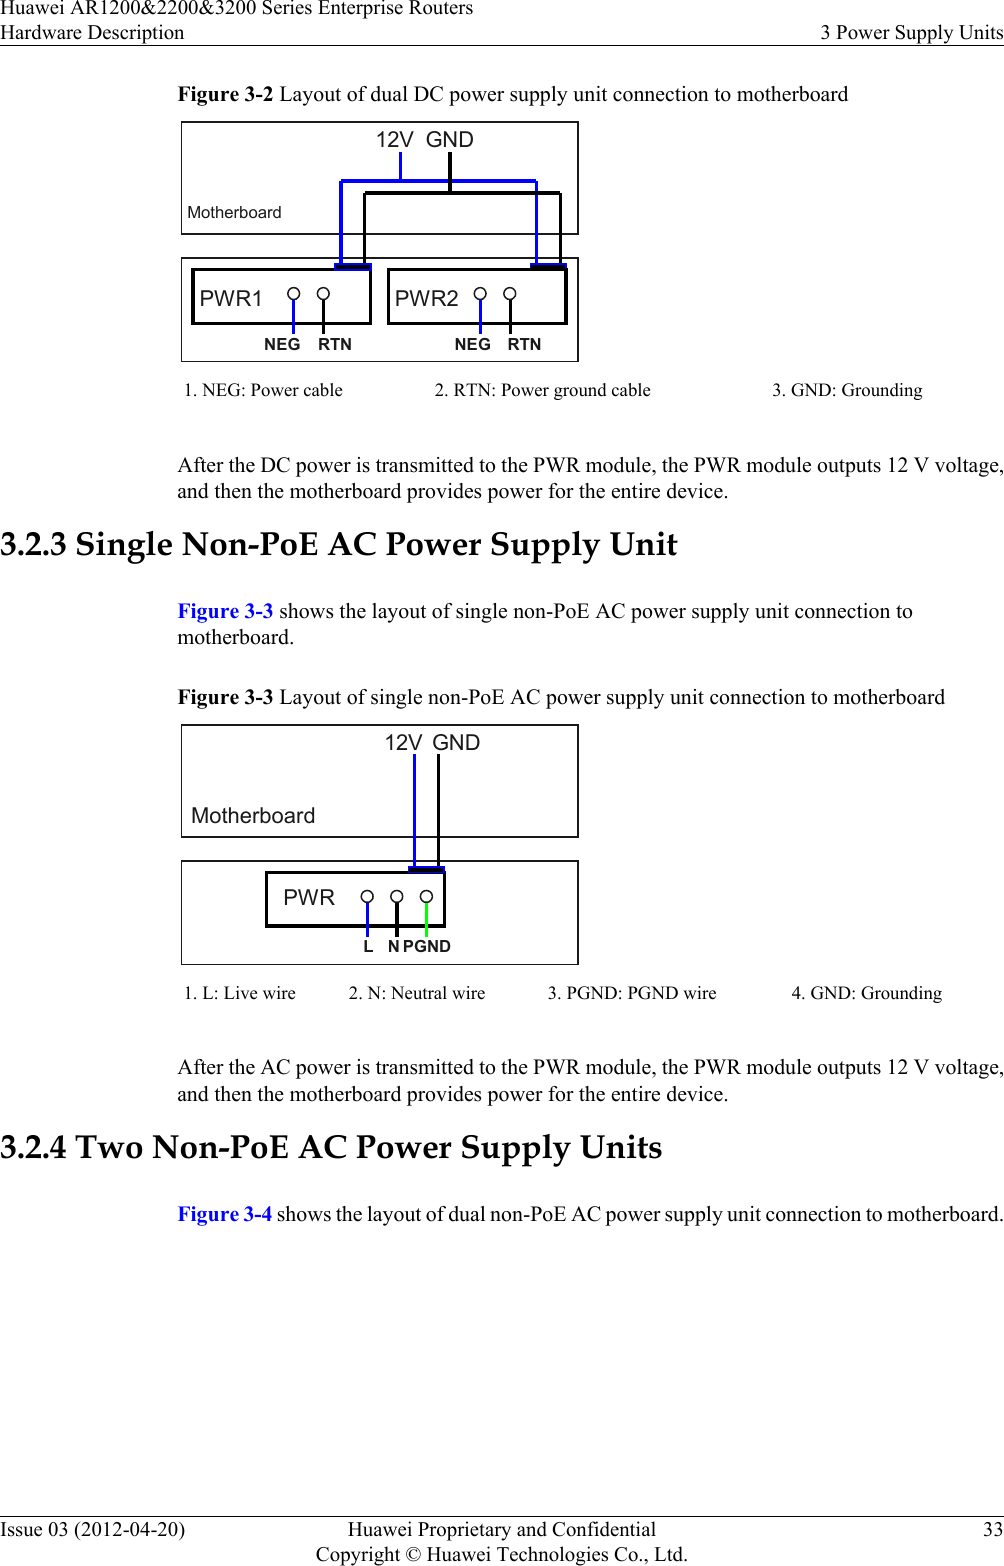 Figure 3-2 Layout of dual DC power supply unit connection to motherboardNEG RTNMotherboardGND12VNEG RTNPWR2PWR11. NEG: Power cable 2. RTN: Power ground cable 3. GND: GroundingAfter the DC power is transmitted to the PWR module, the PWR module outputs 12 V voltage,and then the motherboard provides power for the entire device.3.2.3 Single Non-PoE AC Power Supply UnitFigure 3-3 shows the layout of single non-PoE AC power supply unit connection tomotherboard.Figure 3-3 Layout of single non-PoE AC power supply unit connection to motherboardMotherboardGND12VPWRL N PGND1. L: Live wire 2. N: Neutral wire 3. PGND: PGND wire 4. GND: GroundingAfter the AC power is transmitted to the PWR module, the PWR module outputs 12 V voltage,and then the motherboard provides power for the entire device.3.2.4 Two Non-PoE AC Power Supply UnitsFigure 3-4 shows the layout of dual non-PoE AC power supply unit connection to motherboard.Huawei AR1200&amp;2200&amp;3200 Series Enterprise RoutersHardware Description 3 Power Supply UnitsIssue 03 (2012-04-20) Huawei Proprietary and ConfidentialCopyright © Huawei Technologies Co., Ltd.33